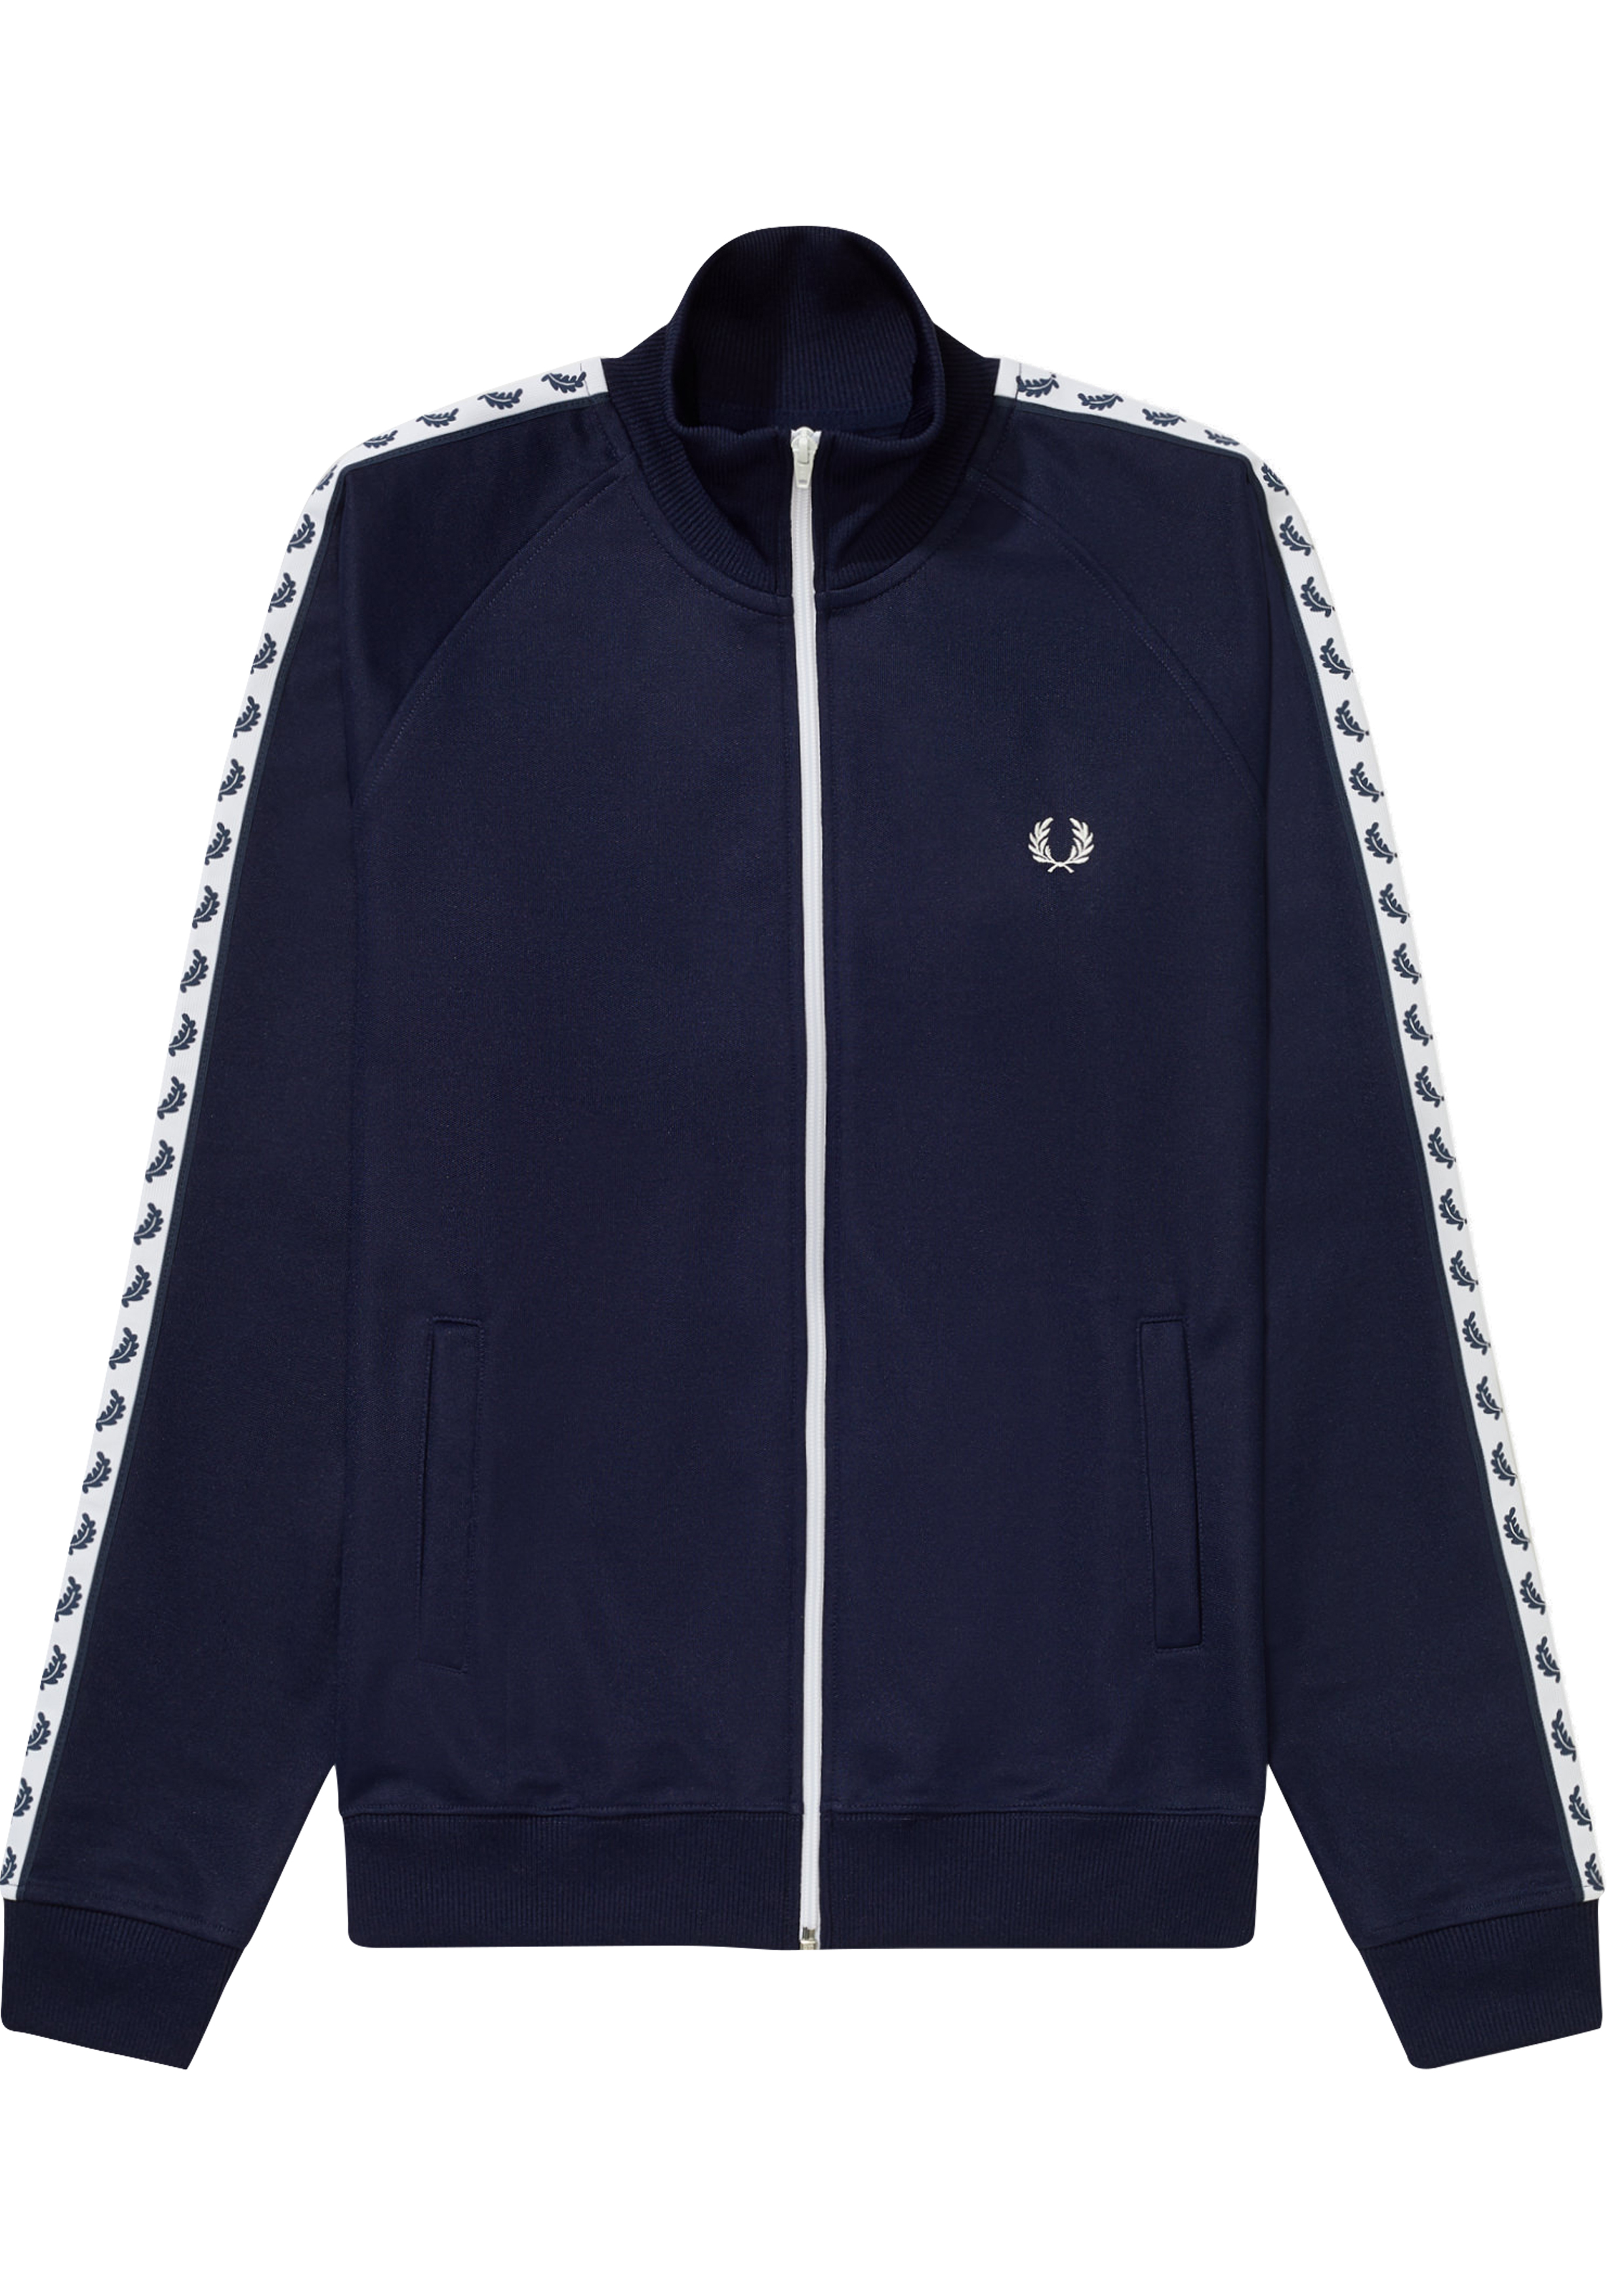 Fred Perry Taped Tricot Track Jacket J6231, heren trainingsjack, marine